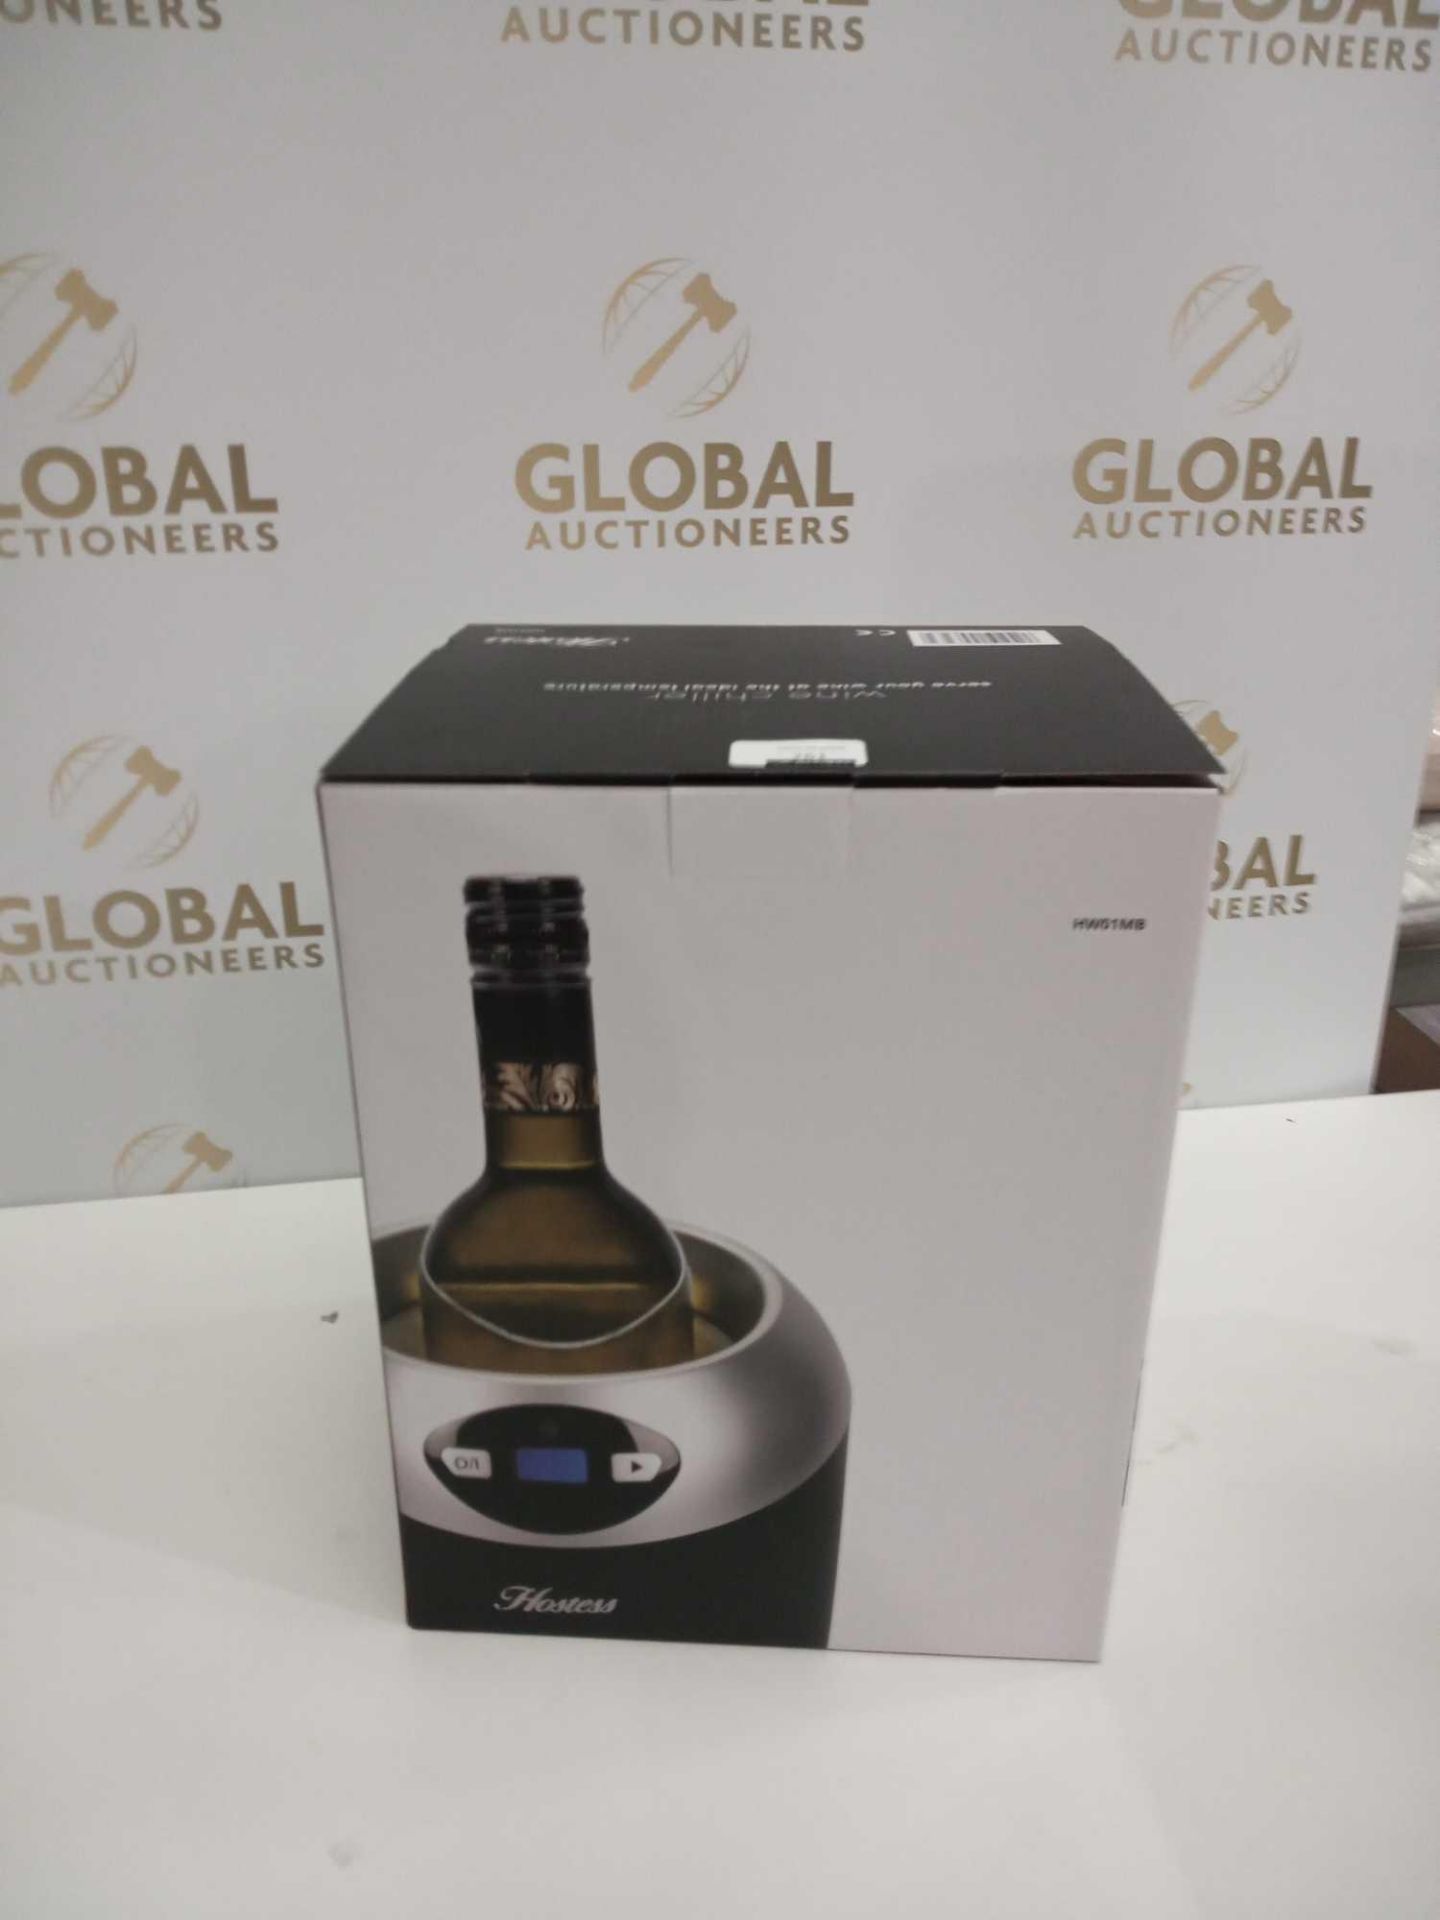 RRP £80 Boxed Single Hostess Wine Chiller